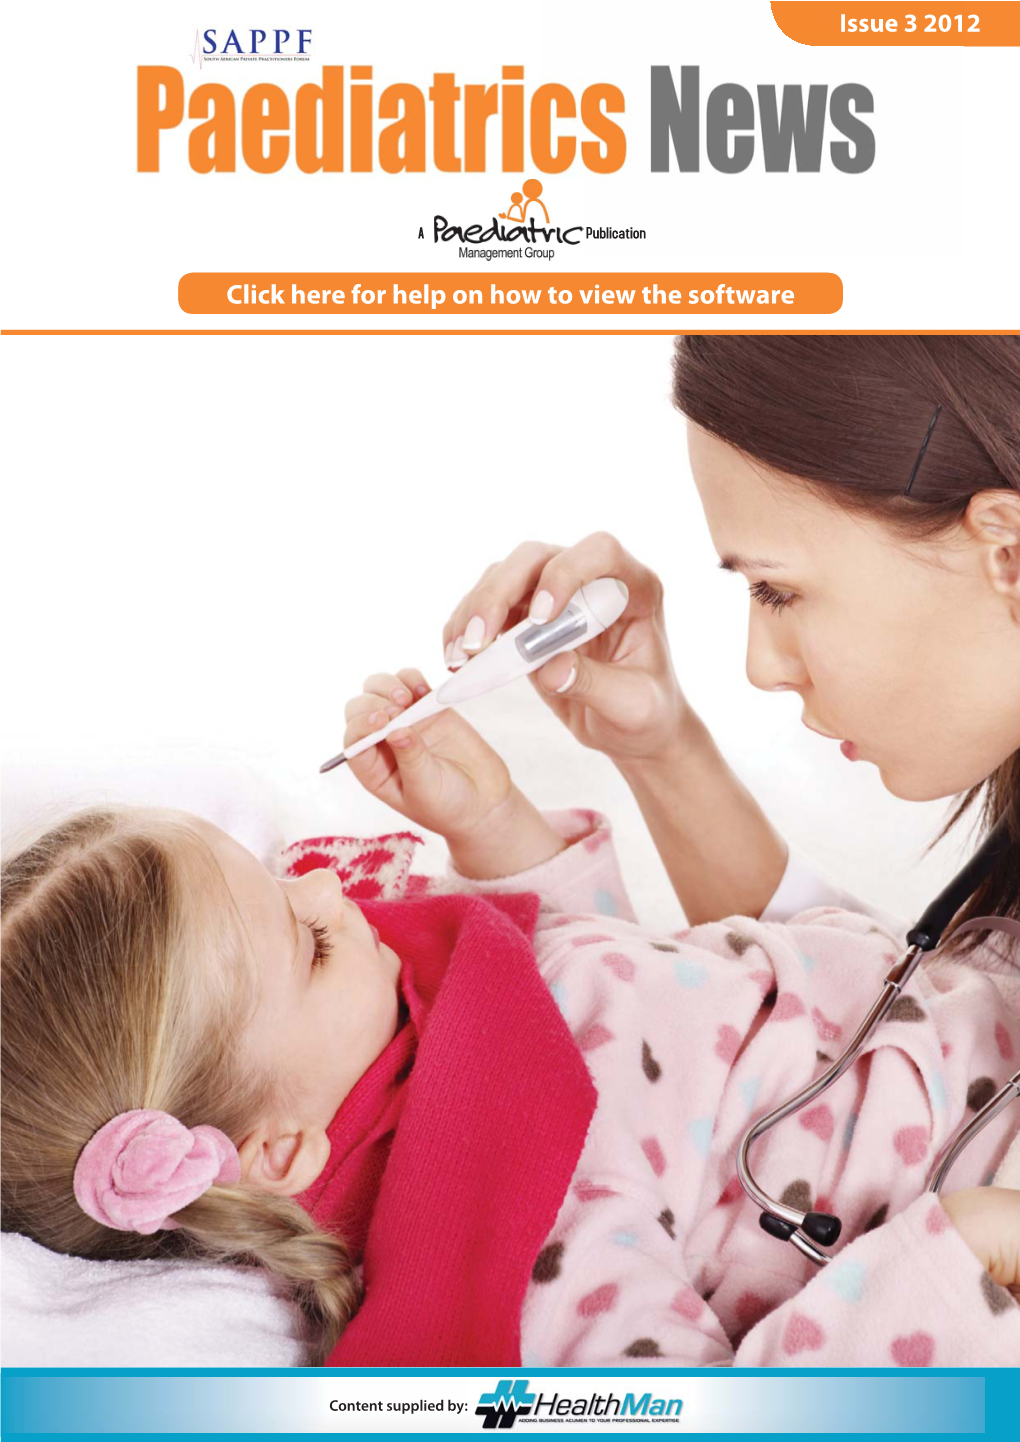 Paediatric News Issue 3 2012.Indd